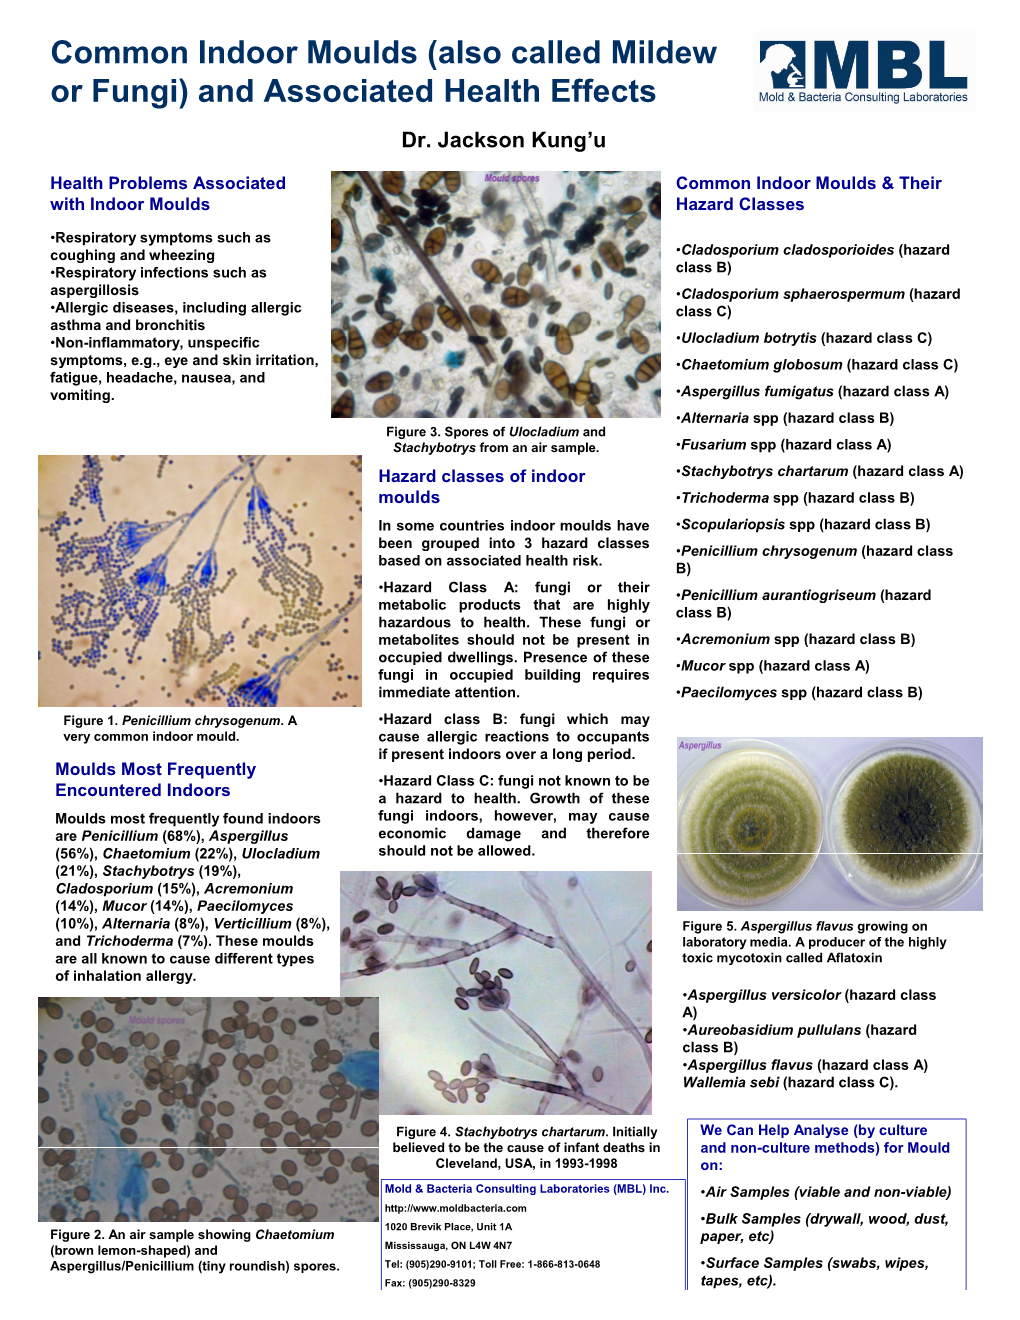 Common Indoor Moulds (Also Called Mildew Or Fungi) and Associated Health Effects Key Image 3